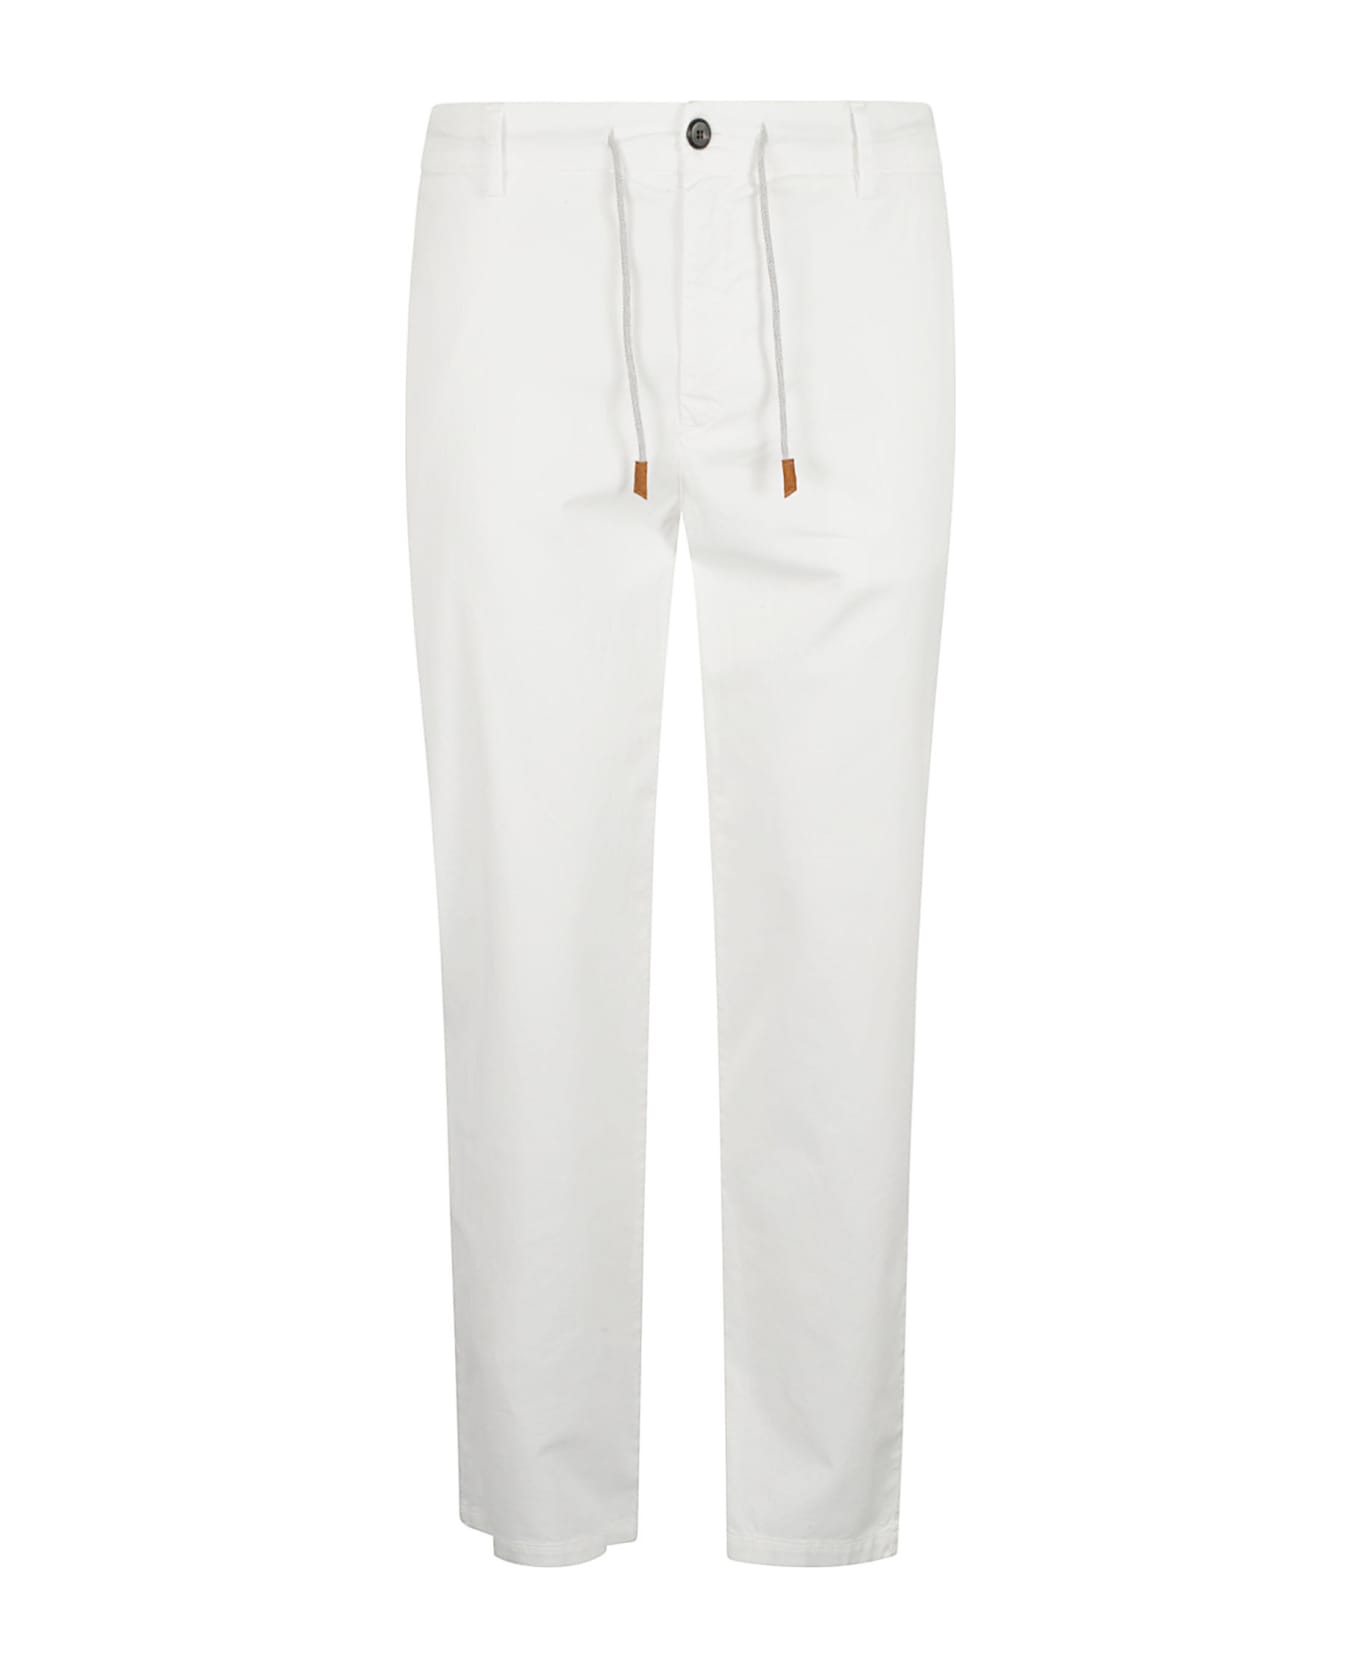 Eleventy Drawstringed Buttoned Trousers - White